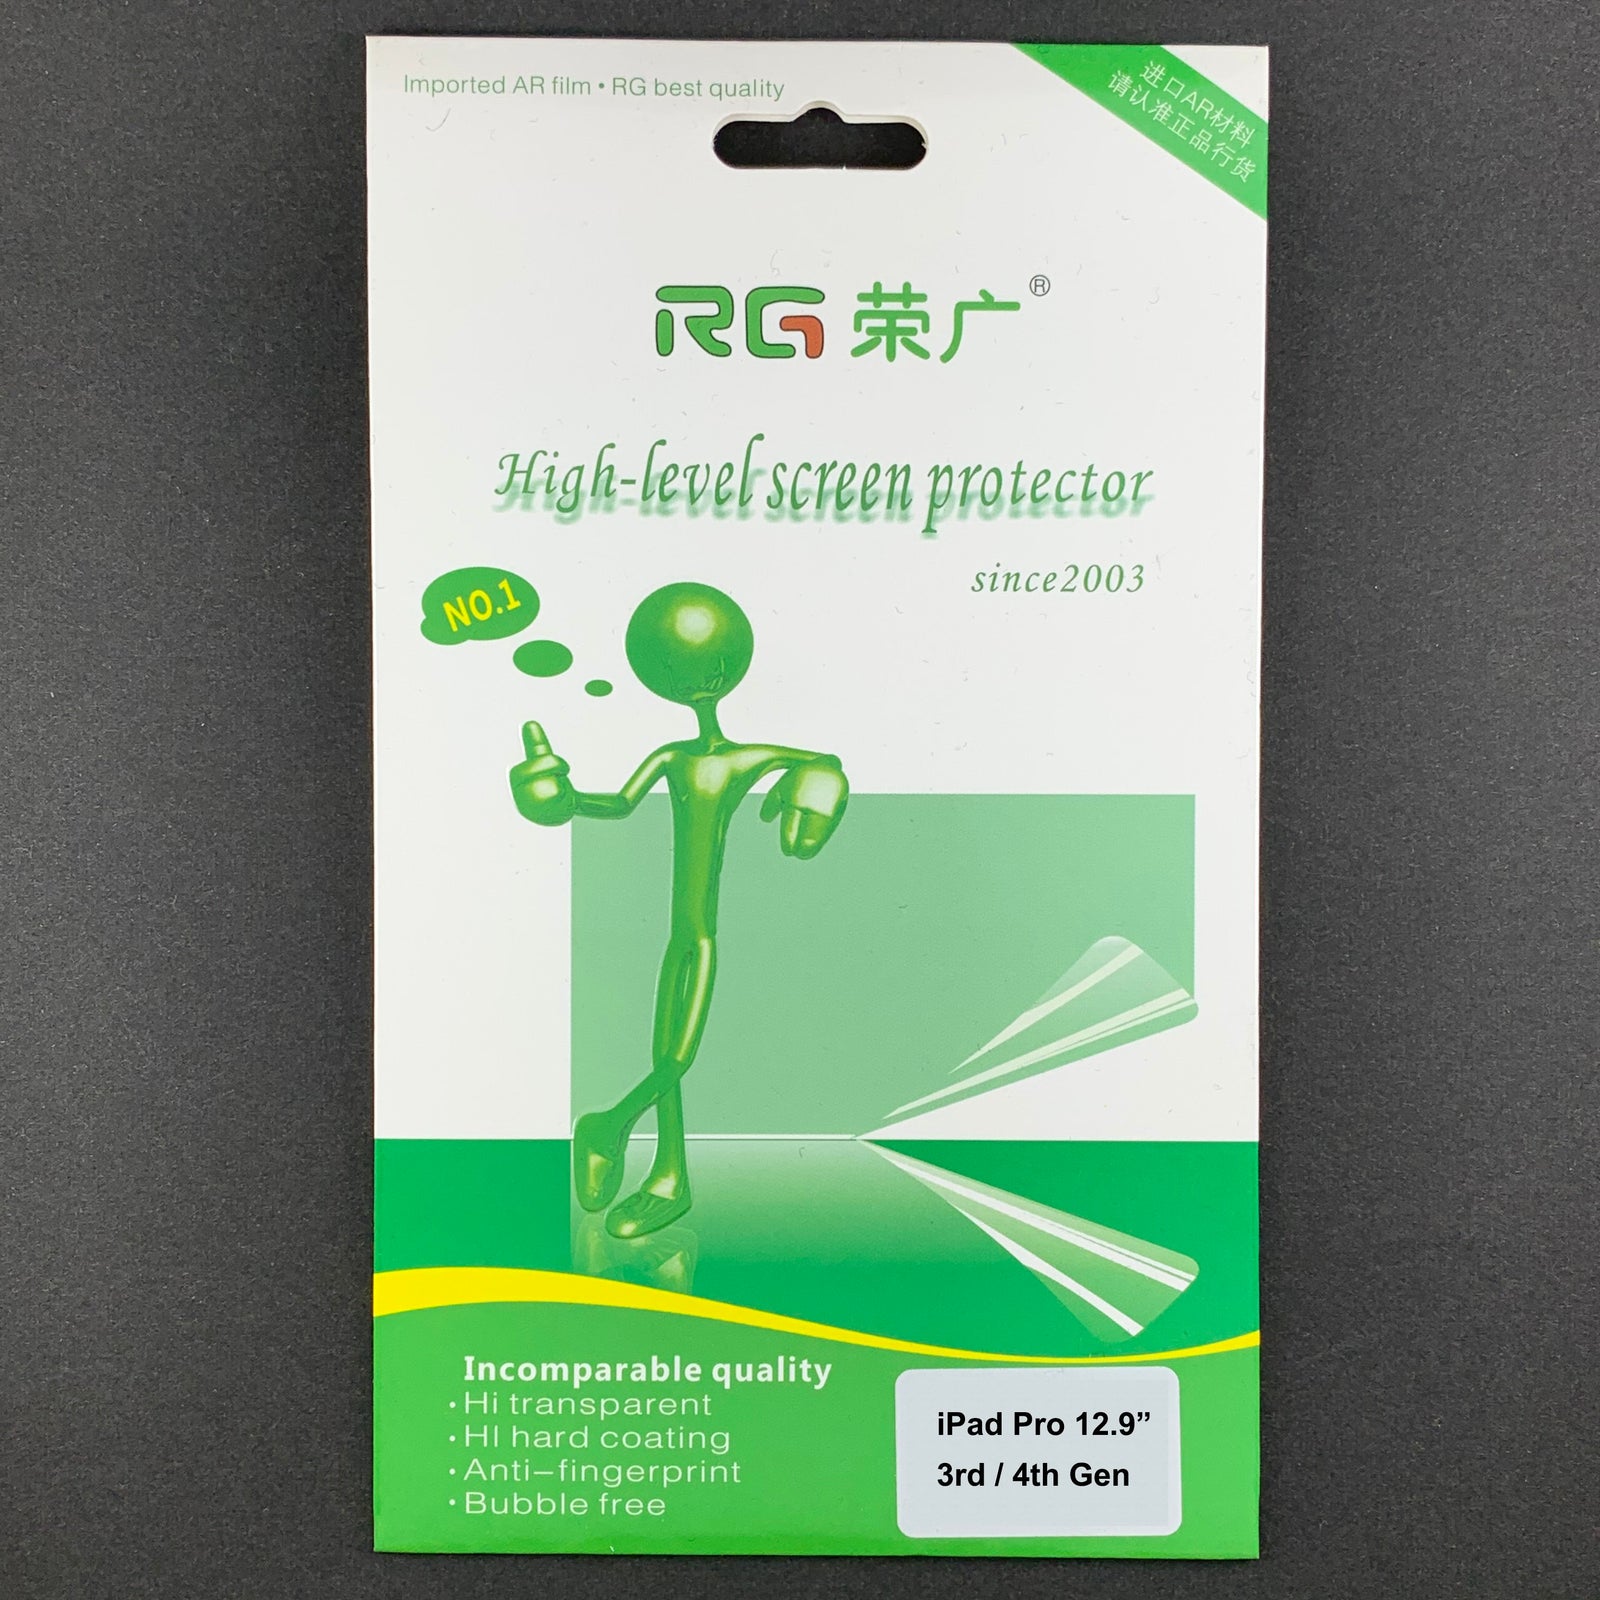 RG Professional Soft Film Screen Protector for iPad Pro 12.9" 3rd / 4th Gen (MATTE, 2-PACK)